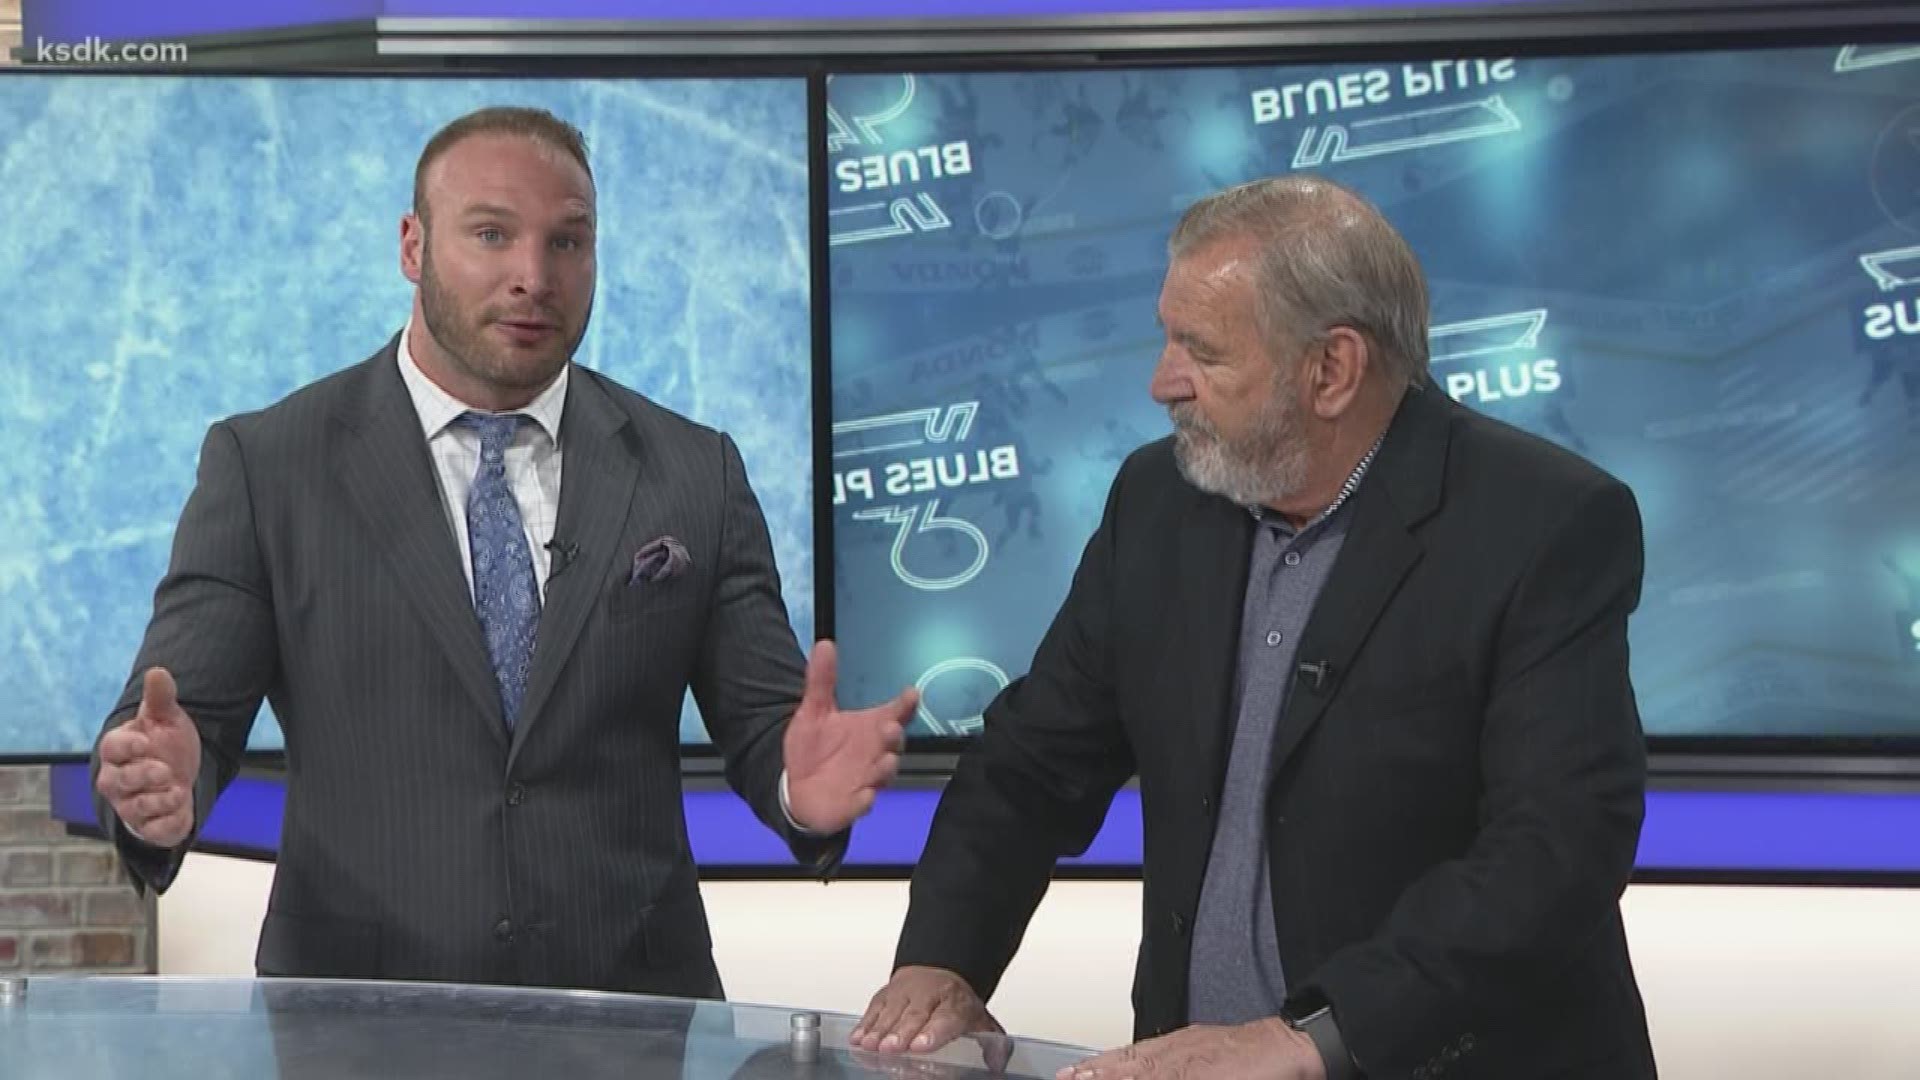 The Sharks had four of their top players not on the bench in the third period. Cam and Bobby break down what that might mean.